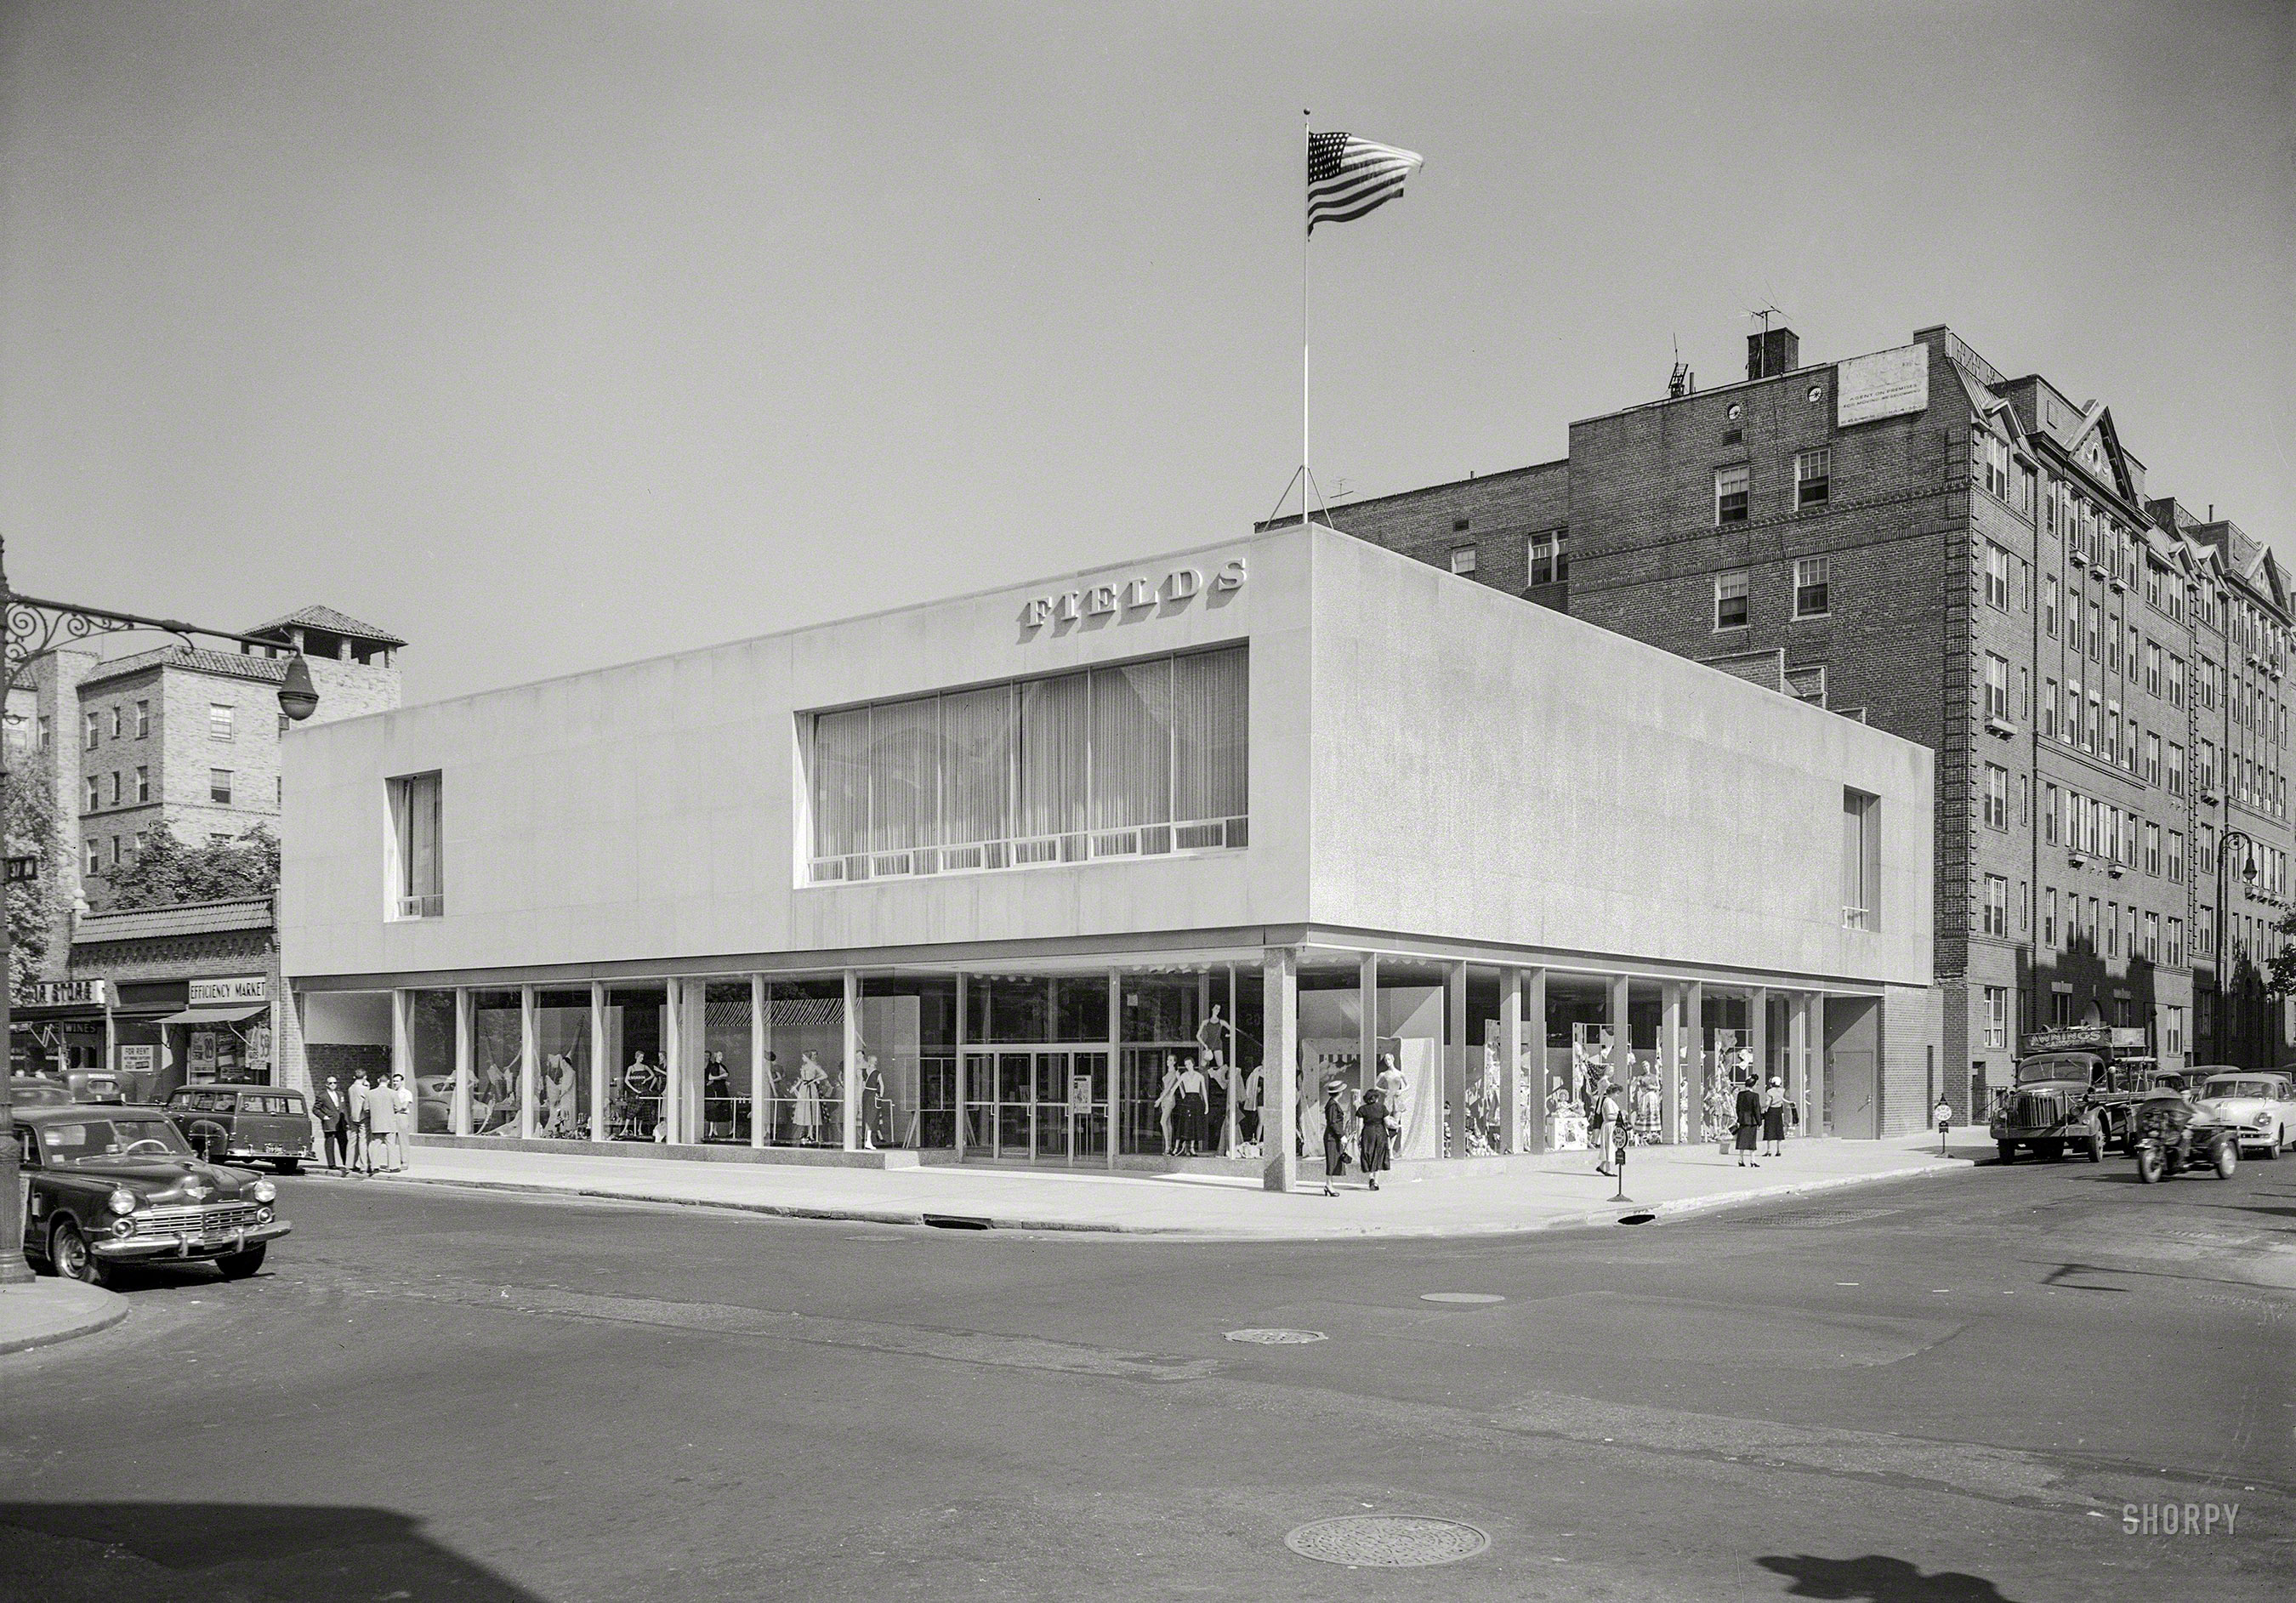 June 8, 1950. "Fields department store, business at 37th Avenue and 82nd Street, Jackson Heights, Queens, New York. Exterior, by day." (And by night.) 5x7 inch acetate negative by Gottscho-Schleisner. View full size.